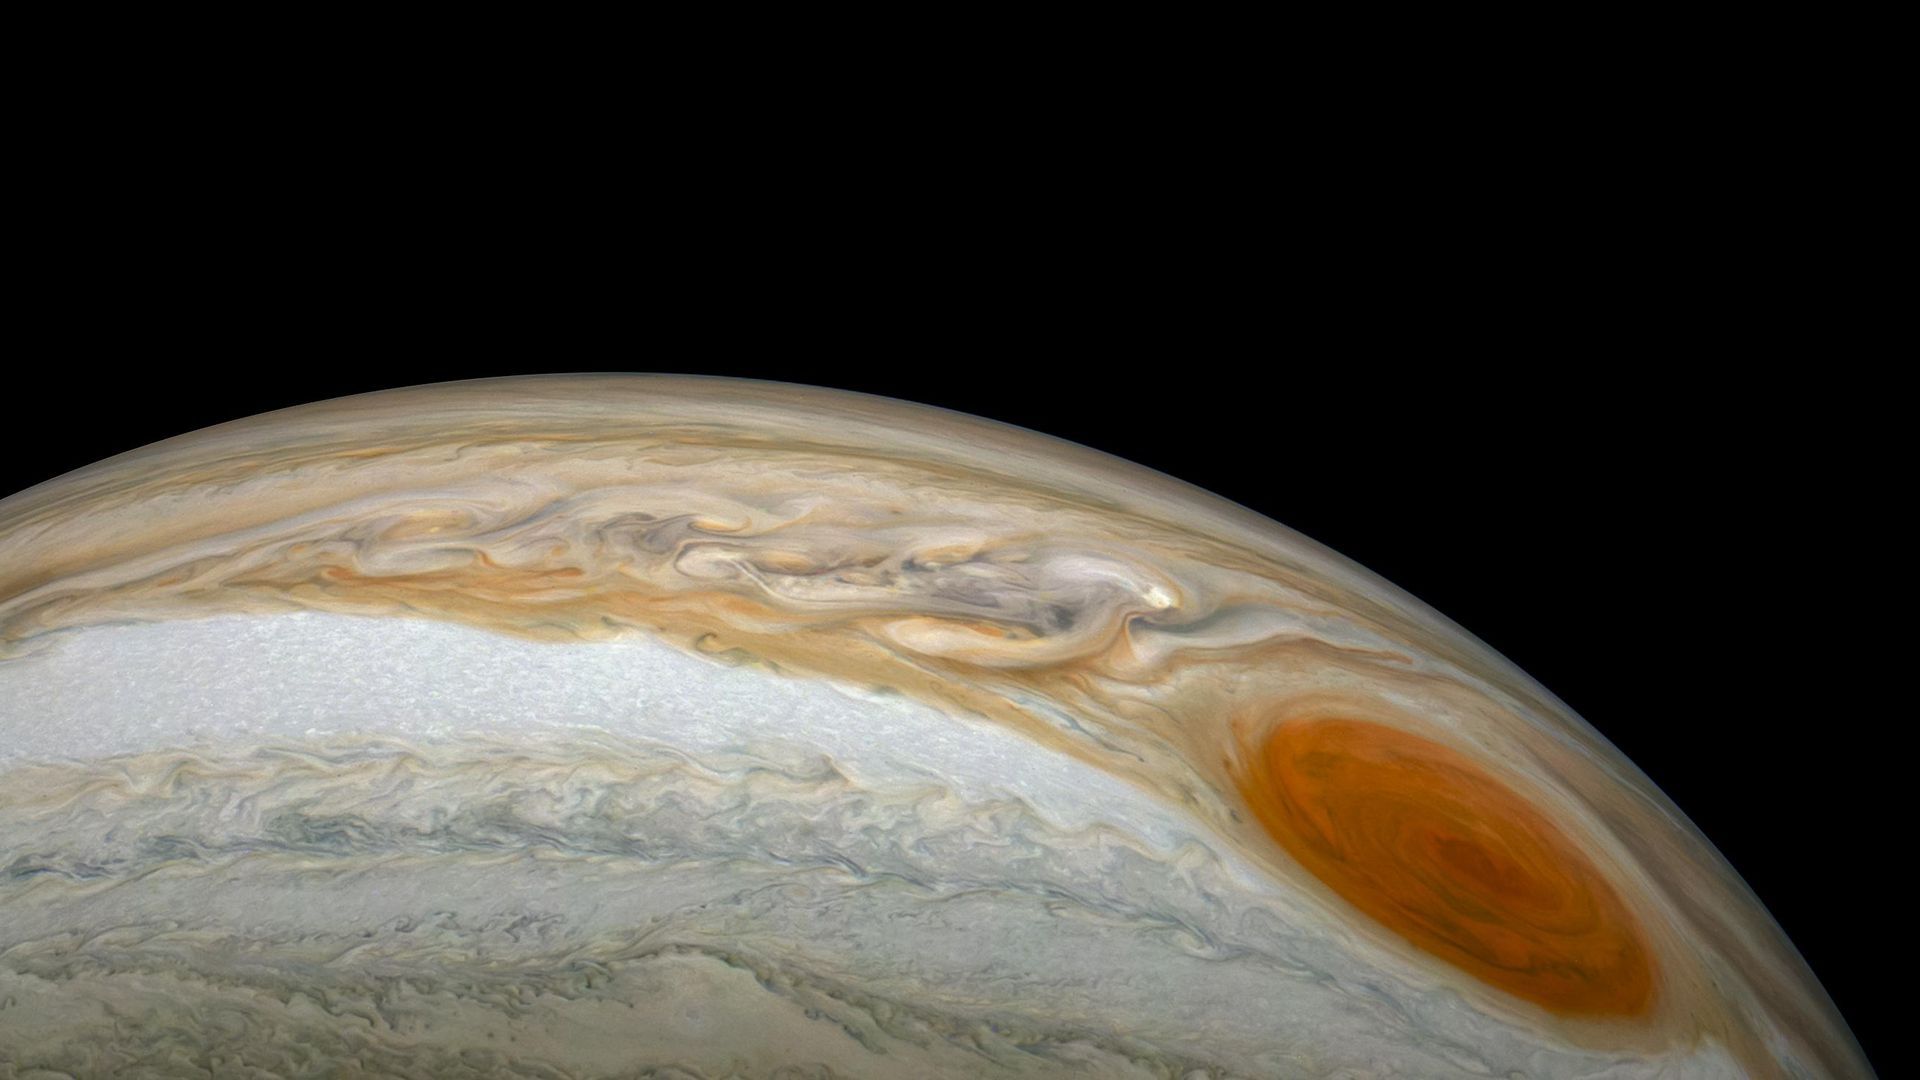 Image of the Great Red Spot on the planet Jupiter